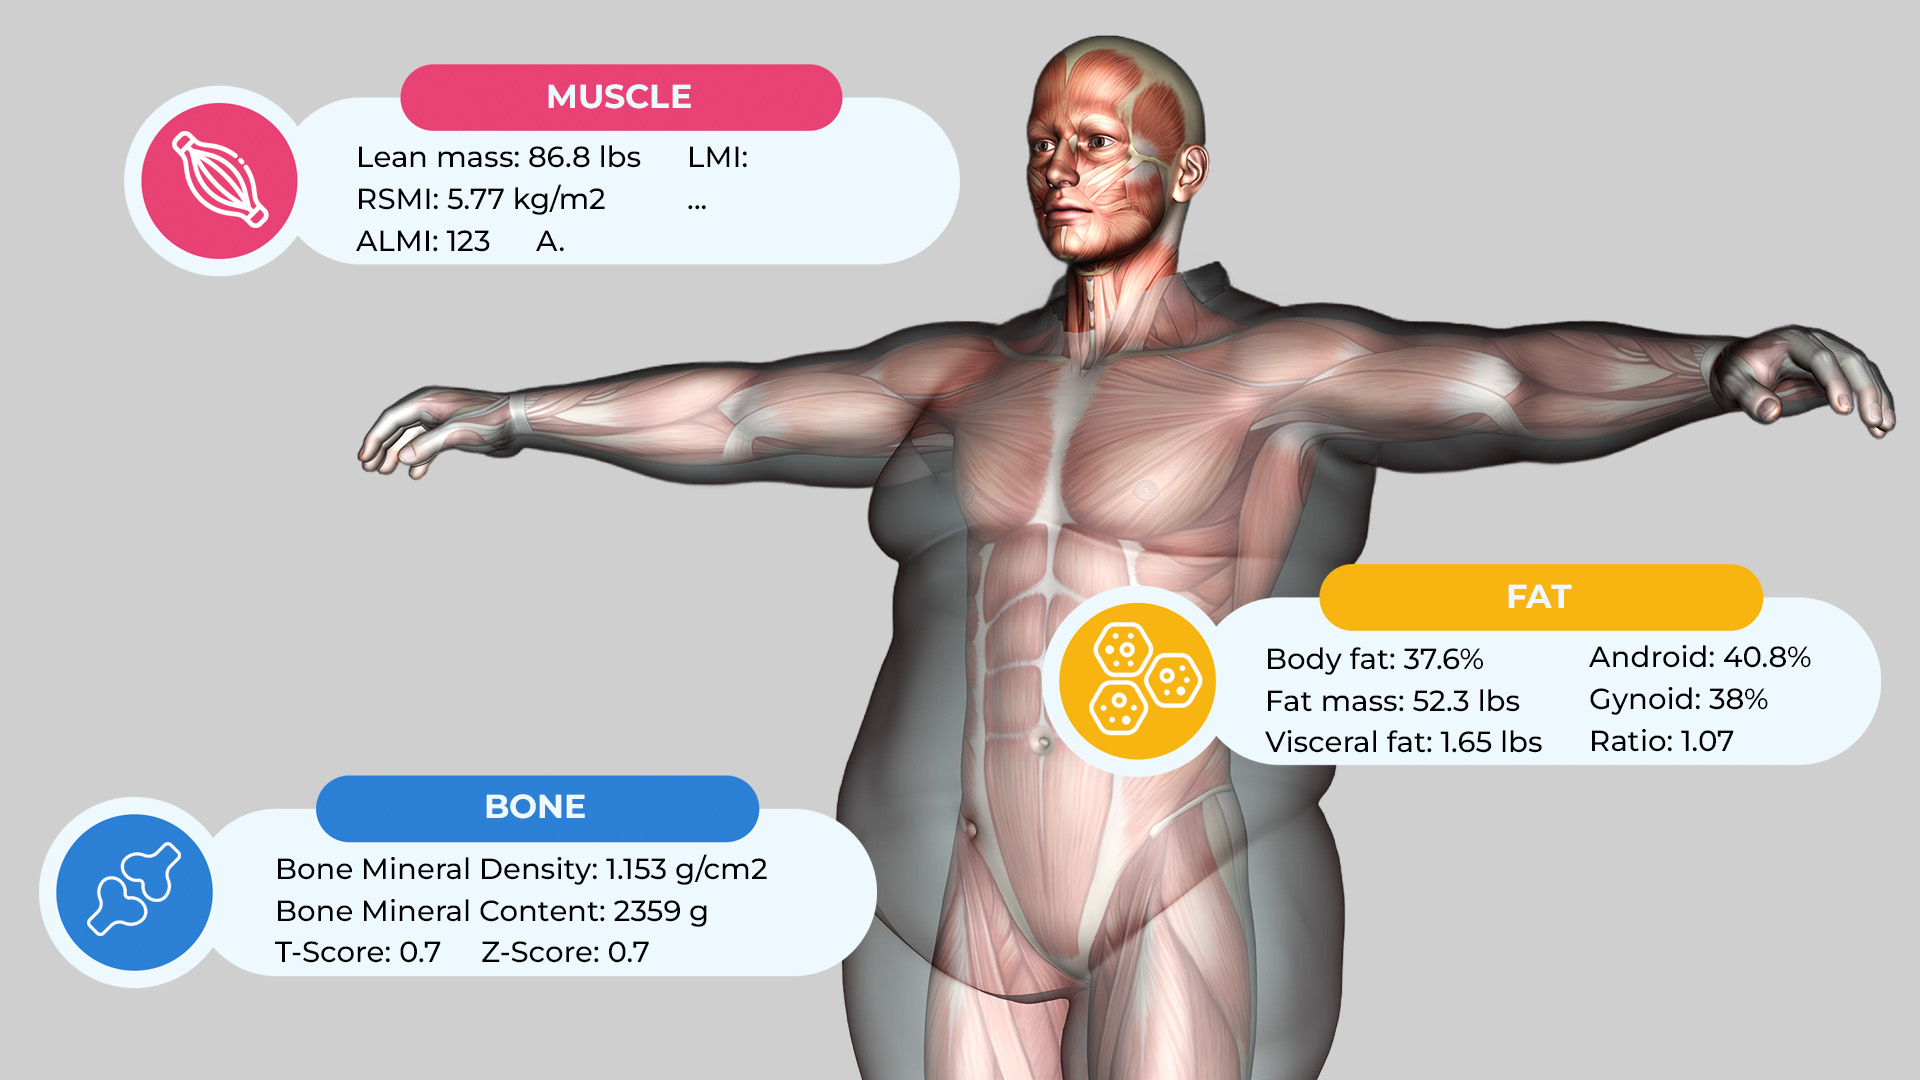 Why Body Composition is important